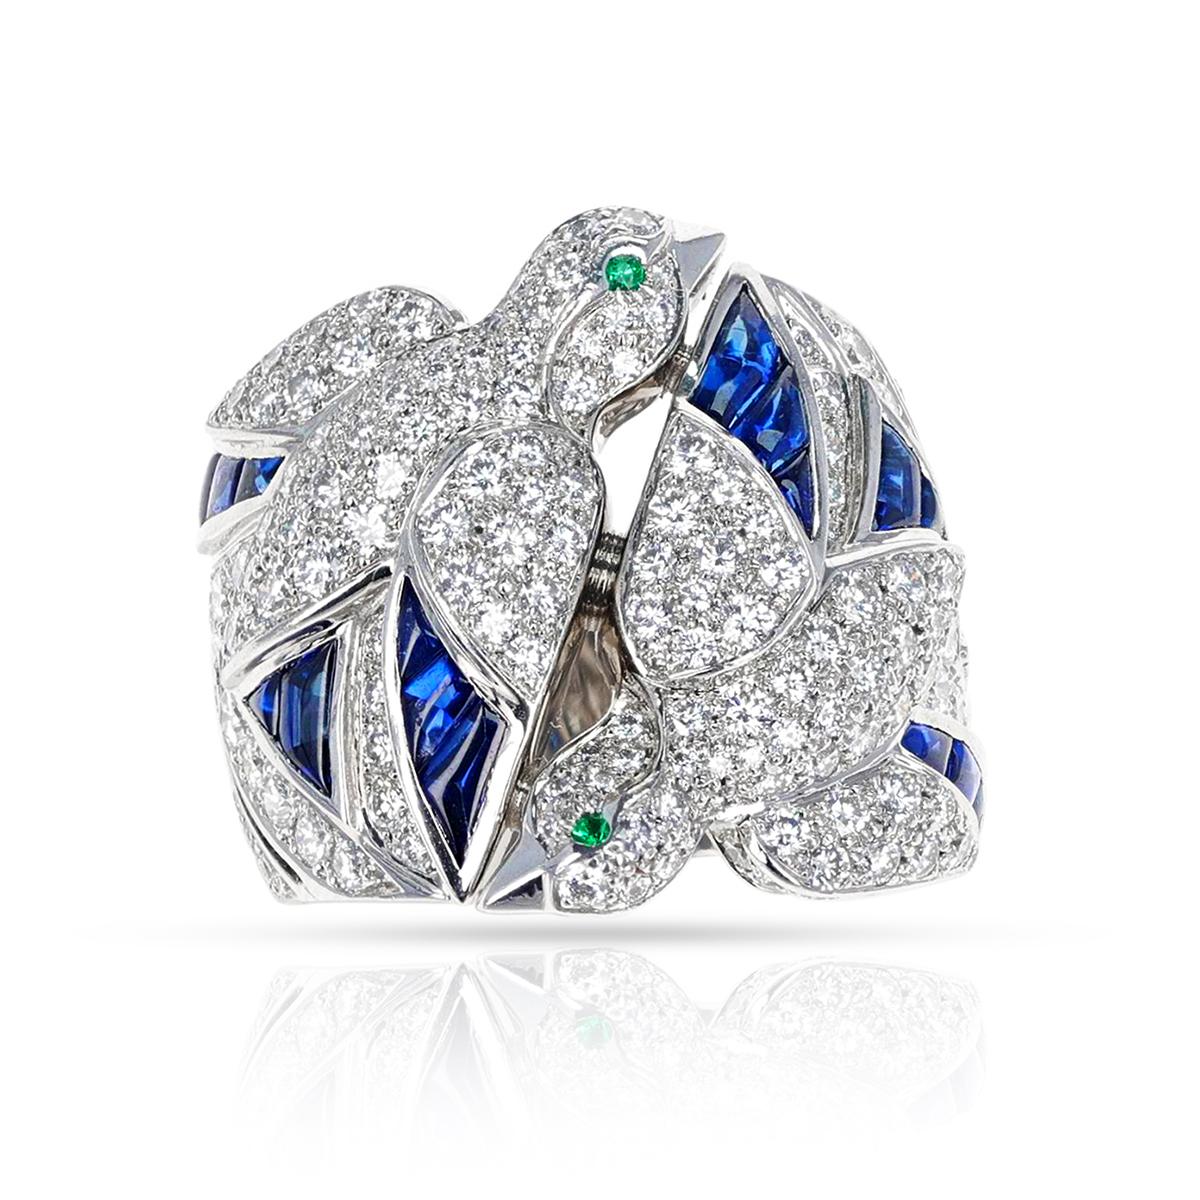 A rare Cartier Les Oiseaux Libérés Diamond, Emerald and Sapphire Ring. The ring size is US 5.50. The total weight is 18.42 grams. The ring is crafted in 18 Karat Gold. 